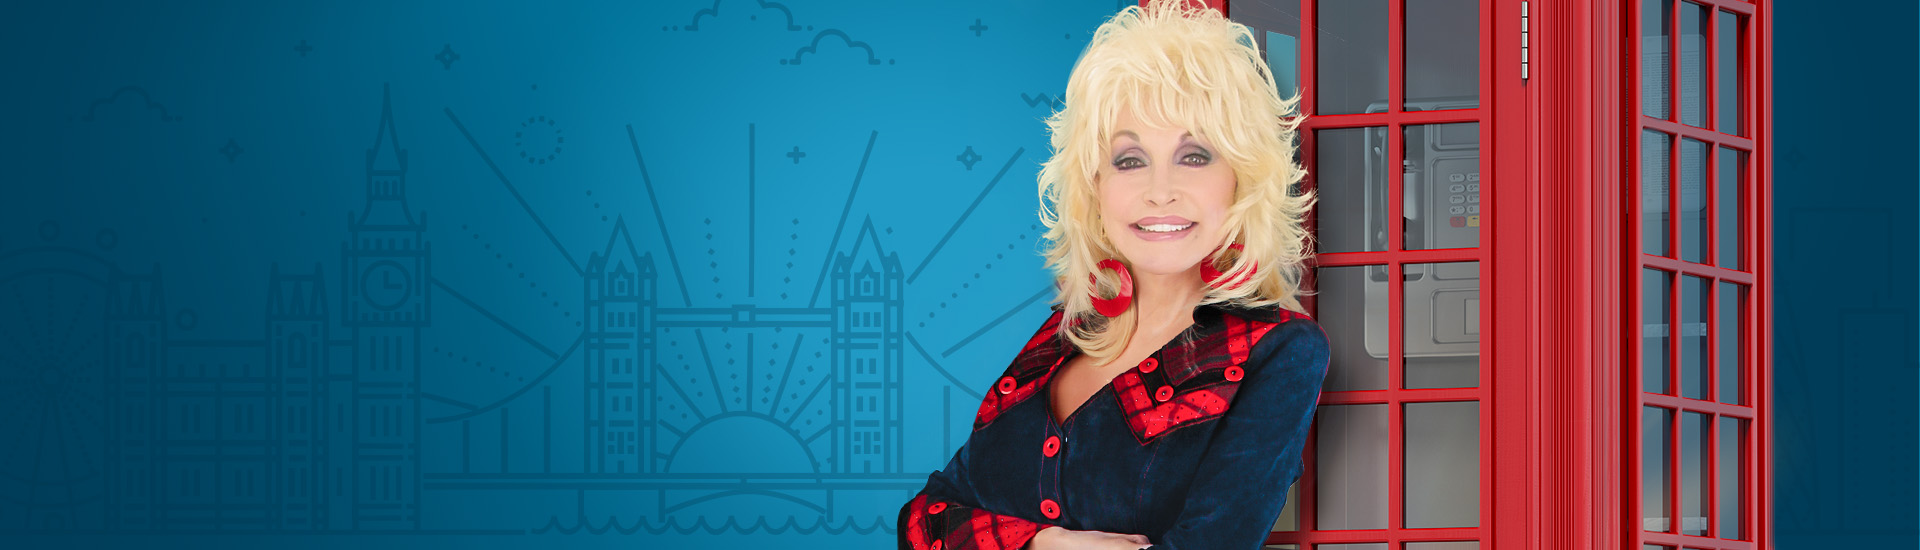 The Library That Dolly Built - Dolly Parton's Imagination Library